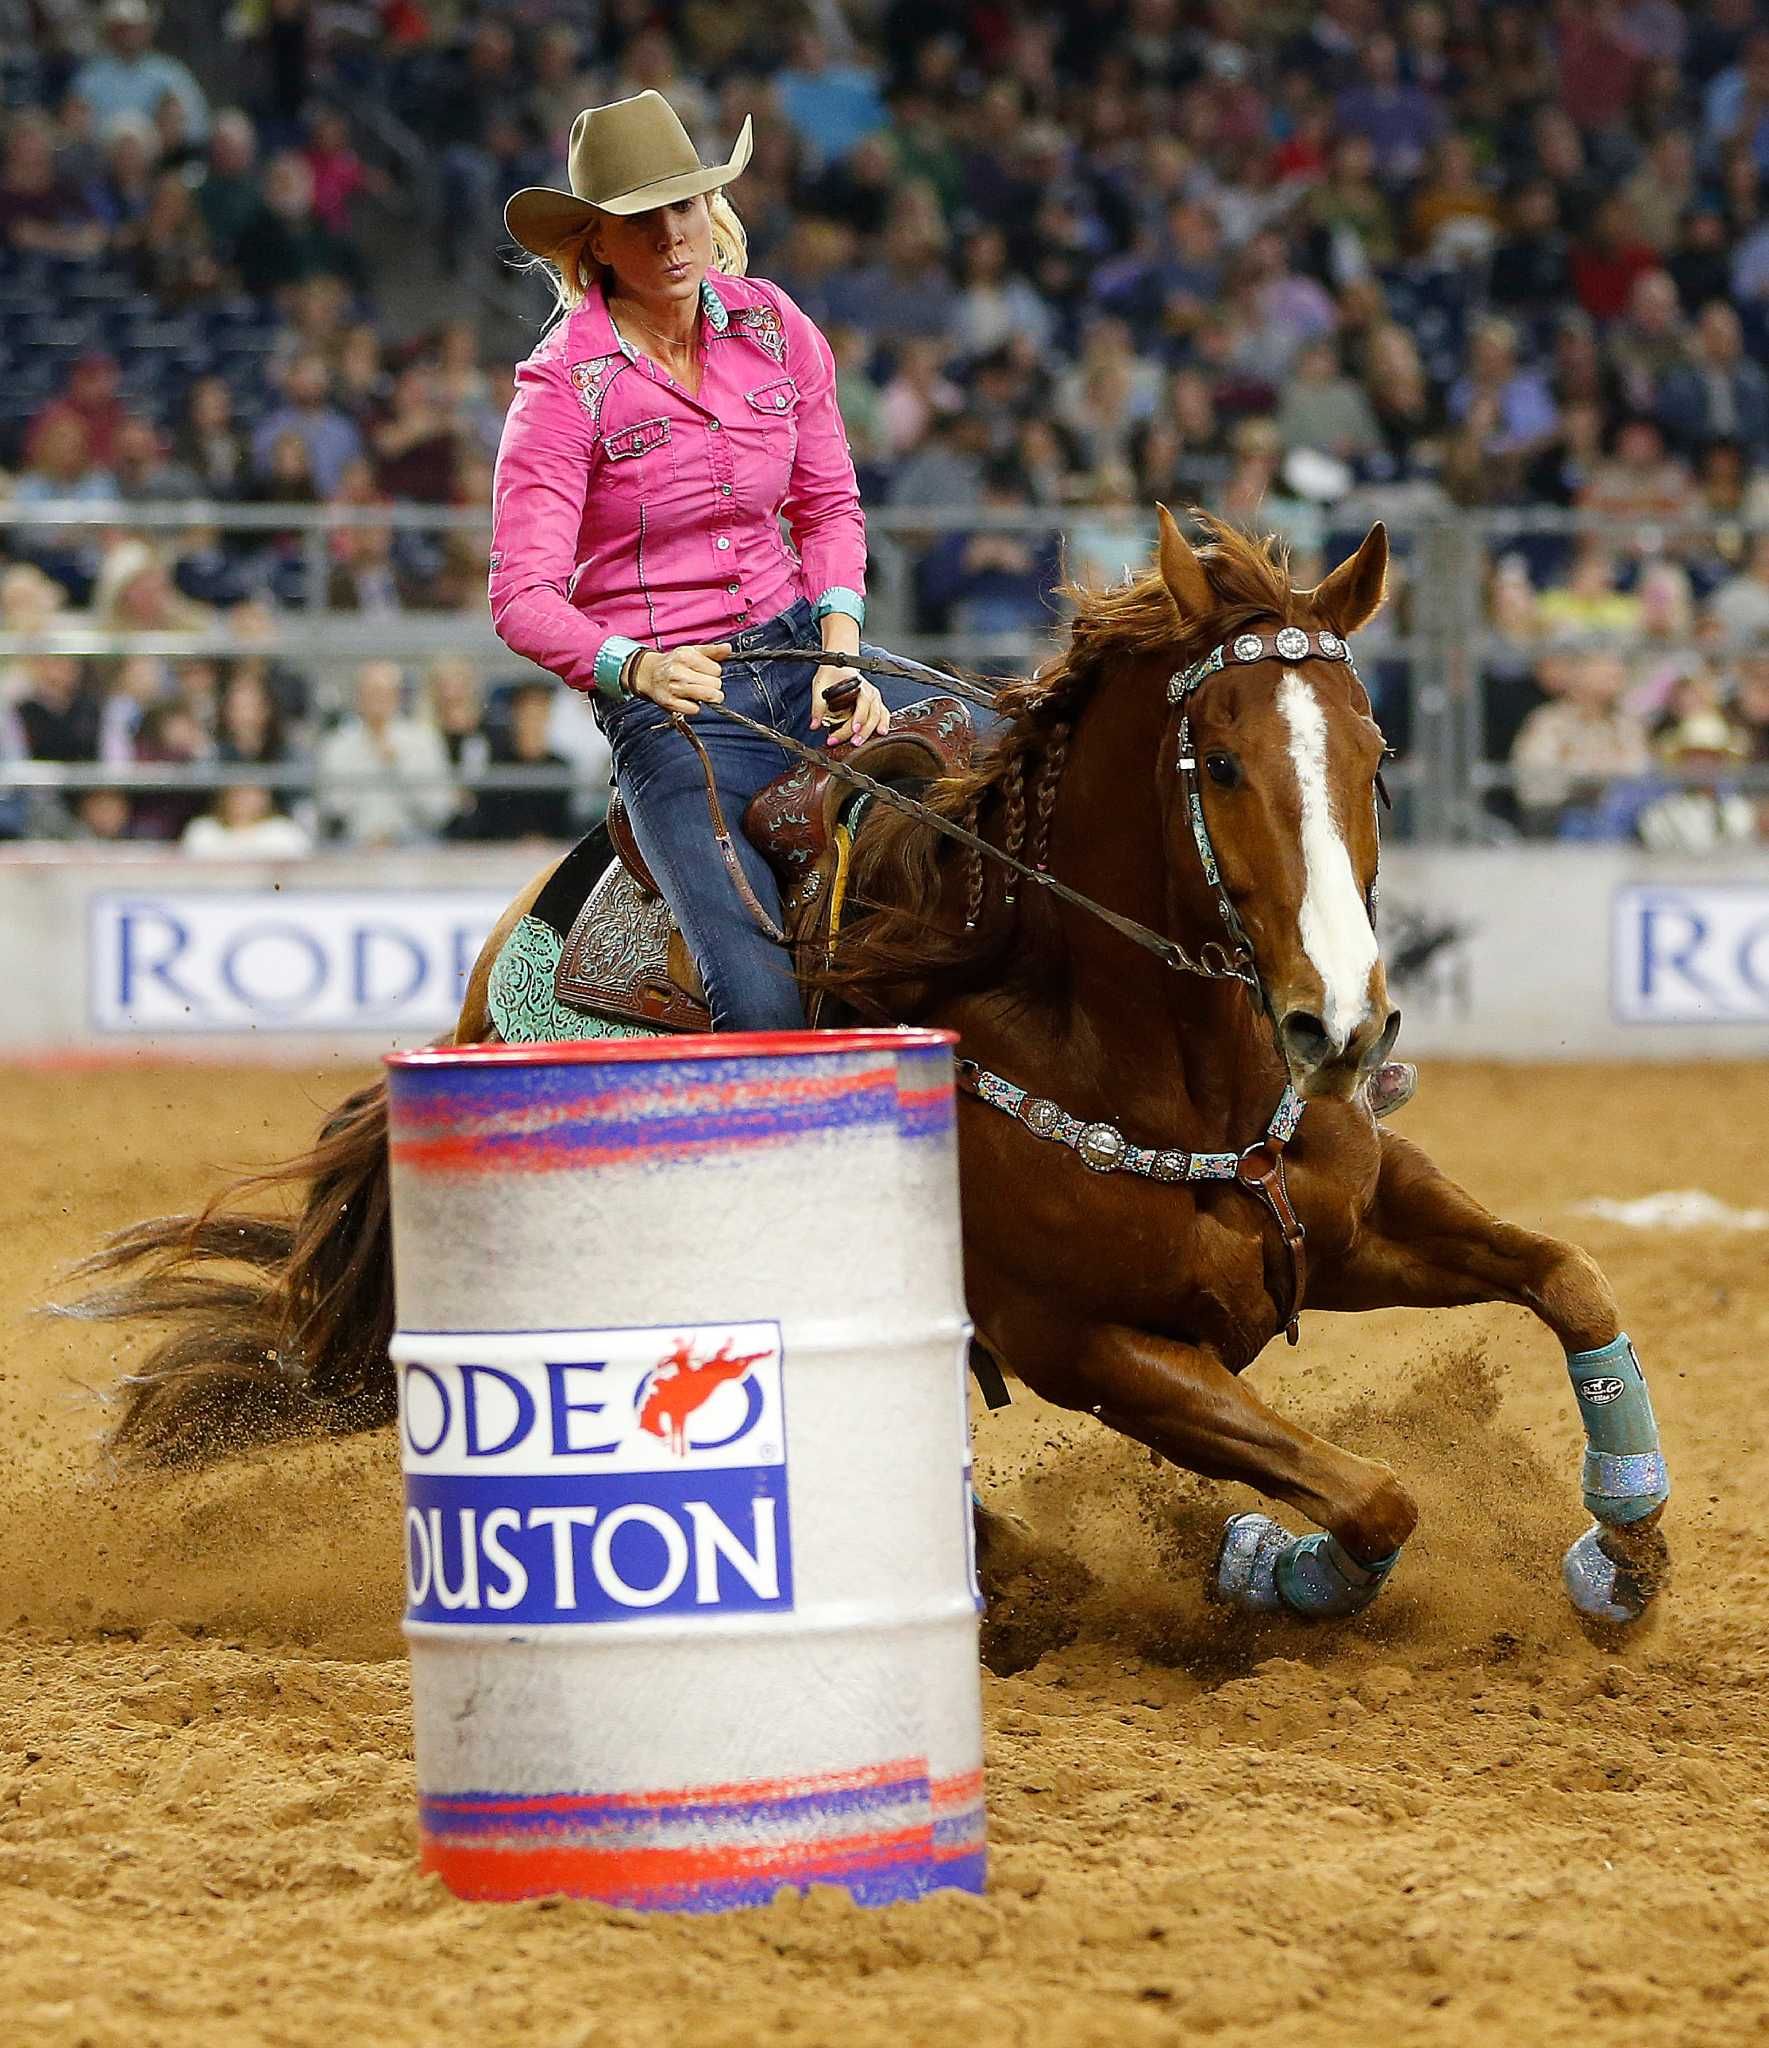 Stuntwoman turned barrel racer Ann Scott welcomed at first RodeoHouston.